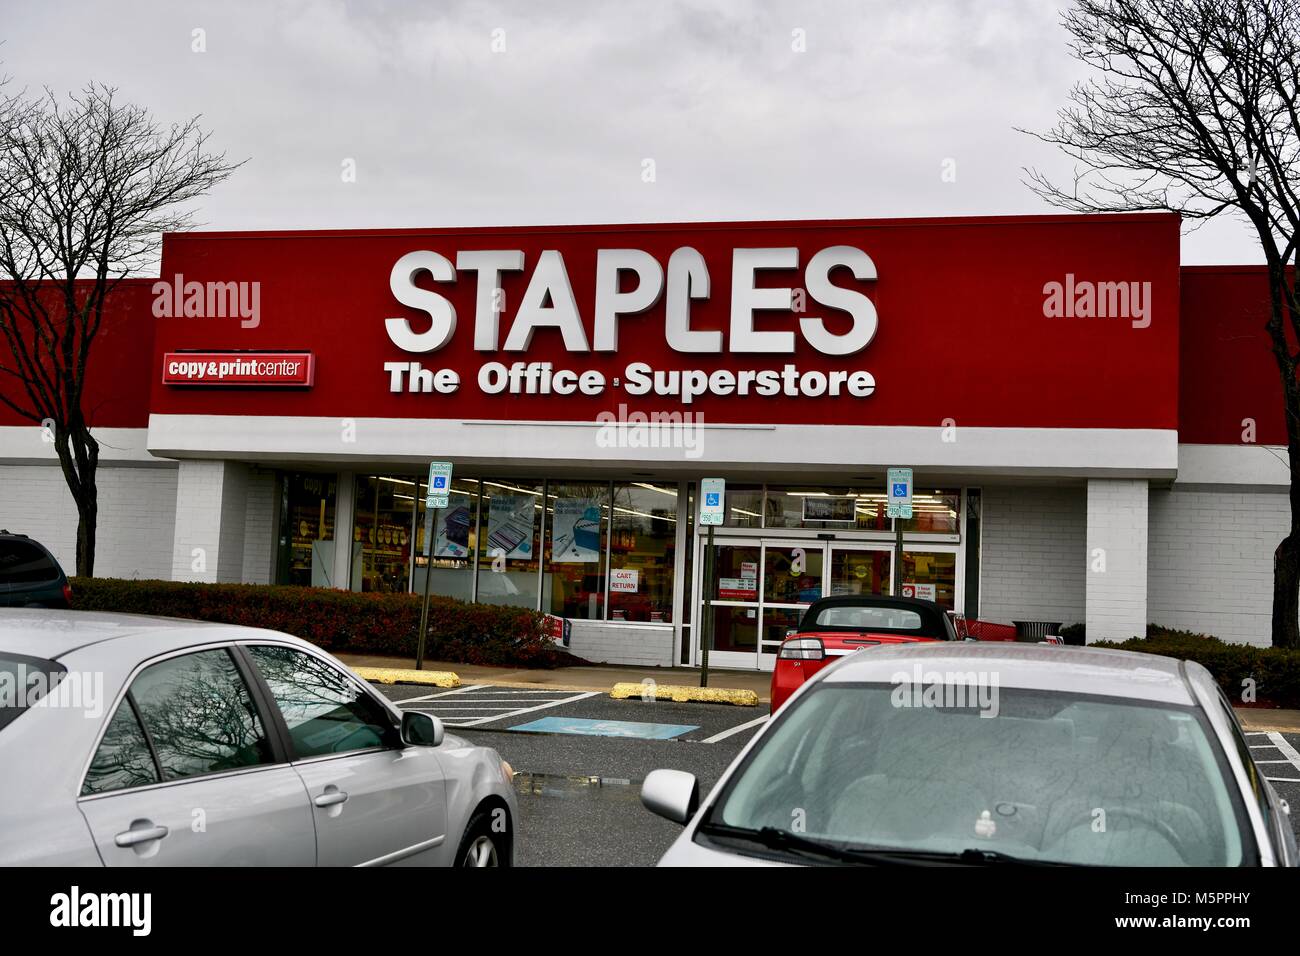 Staples 'The Office Superstore' in Columbia, MD, USA Stock Photo